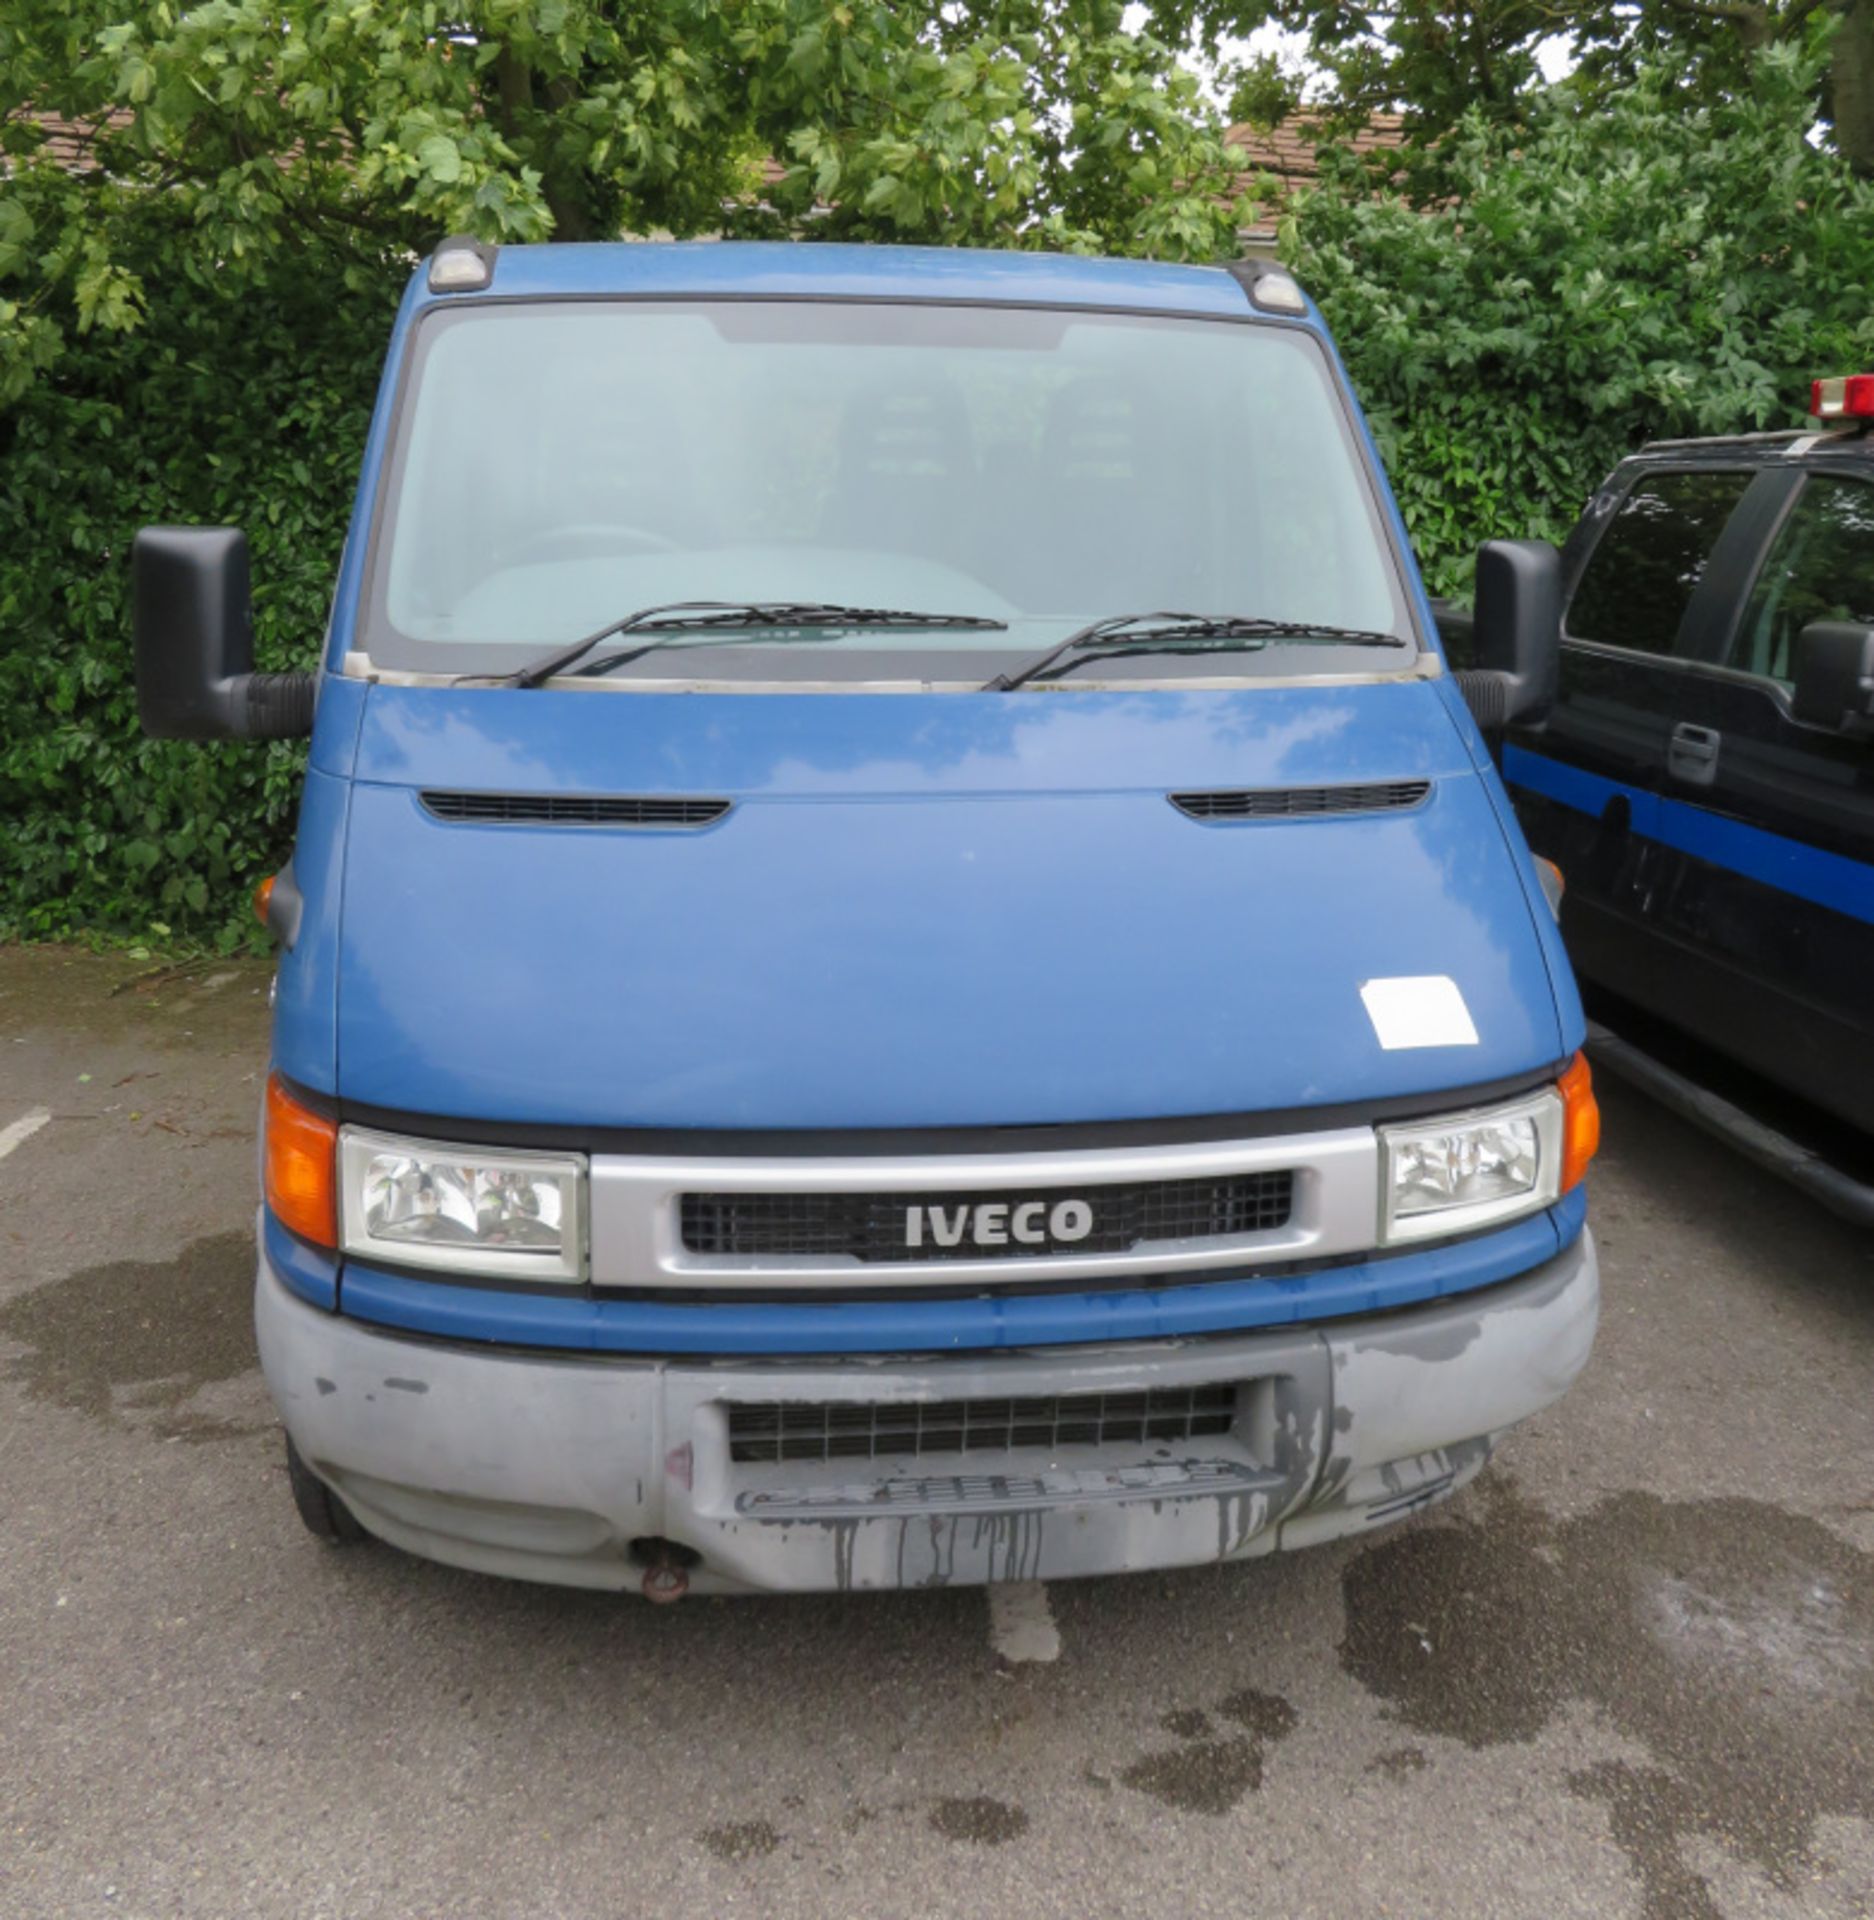 Iveco Daily drop side truck- 29L9 - diesel - year 2004 - 4 cylinder engine - Image 2 of 15